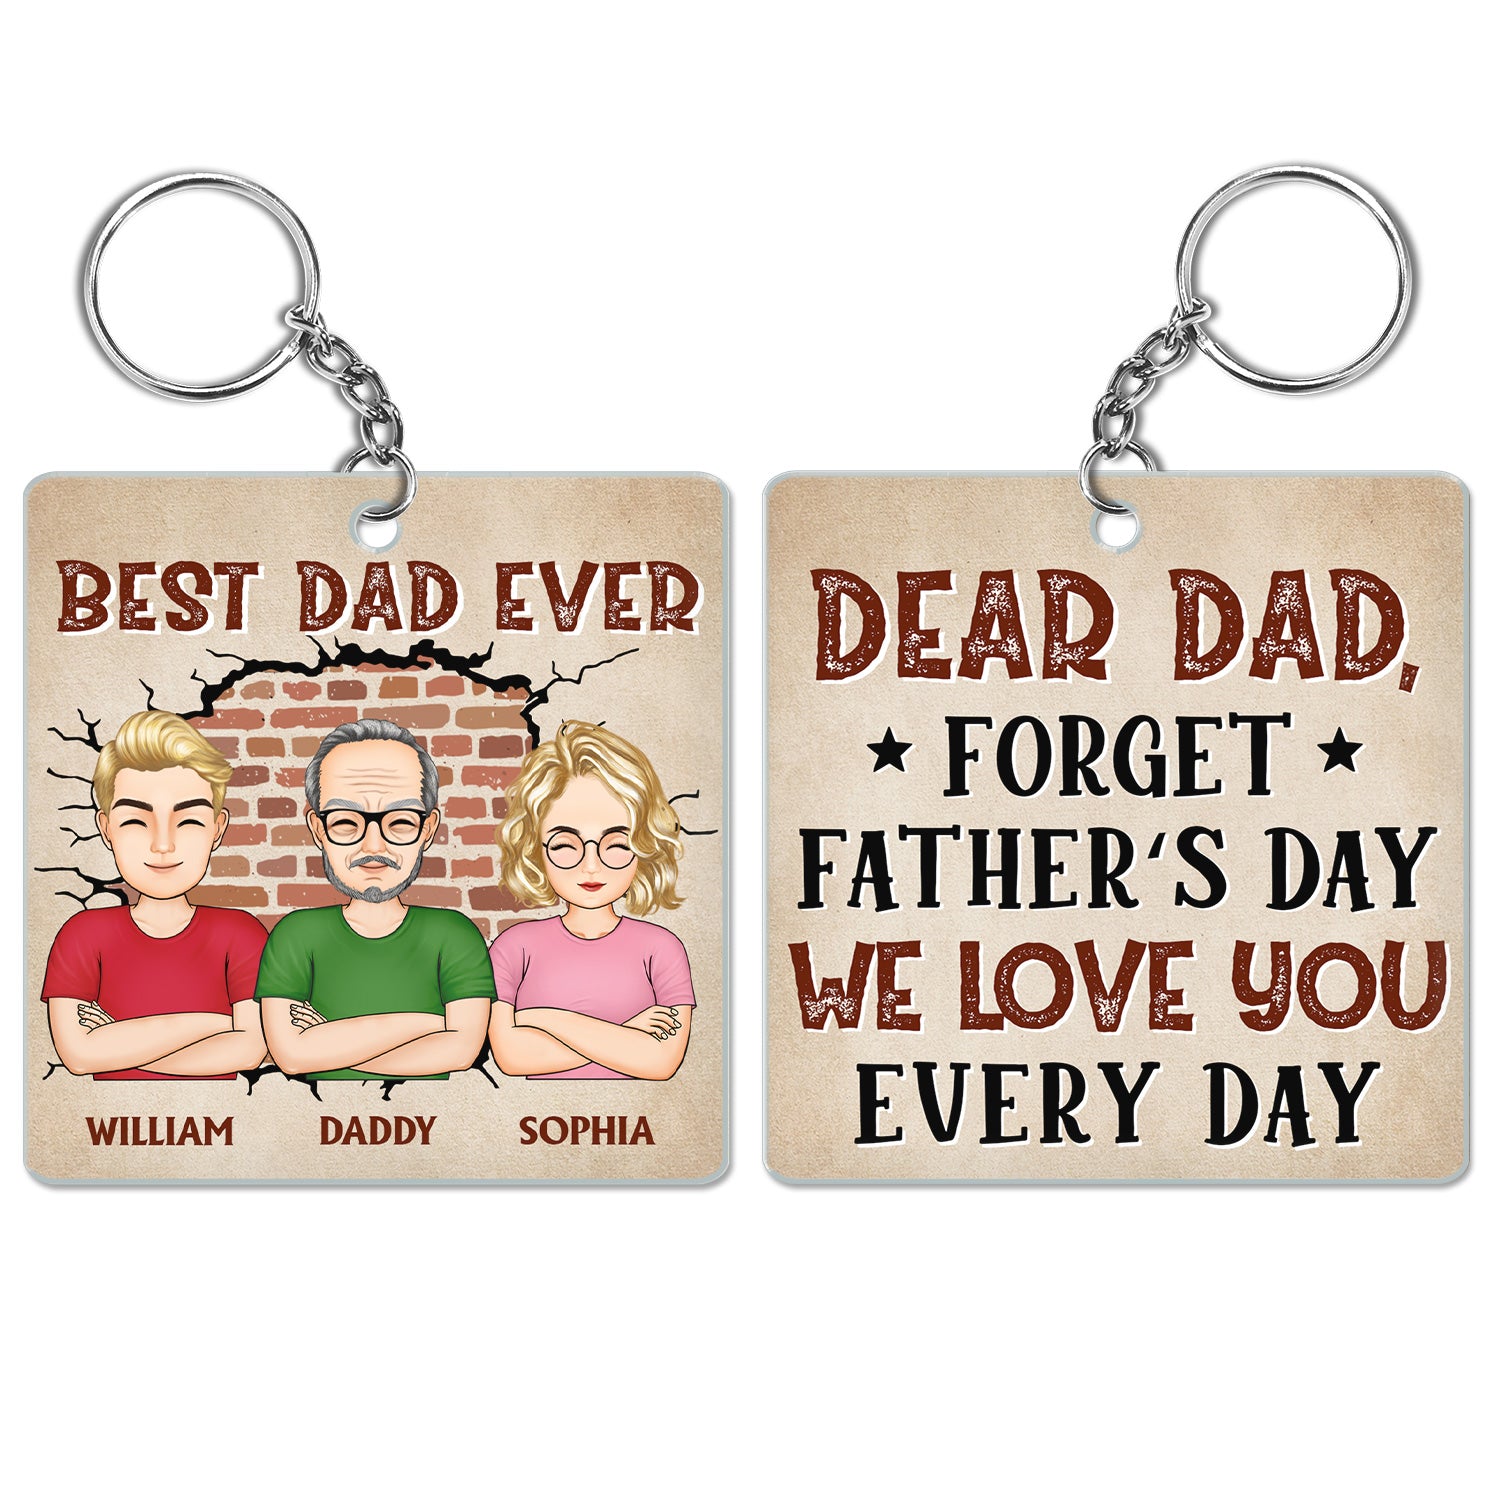 Best Dad Ever - Birthday Gift For Father, Grandpa, Family - Personalized Custom Acrylic Keychain